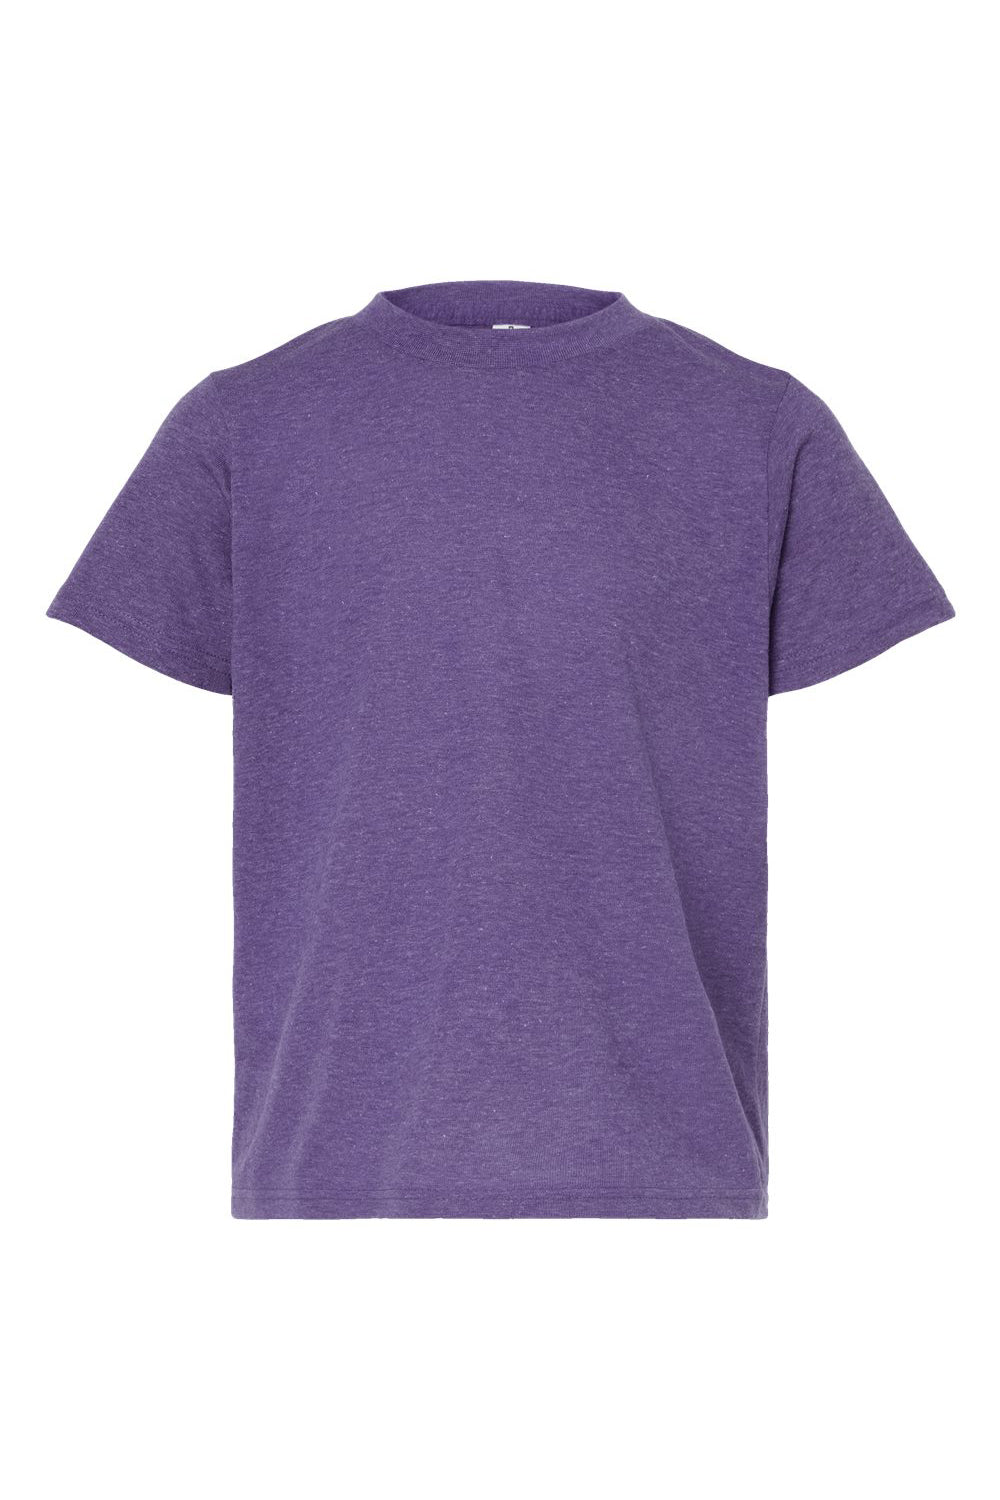 Tultex 265 Youth Poly-Rich Short Sleeve Crewneck T-Shirt Heather Purple Flat Front